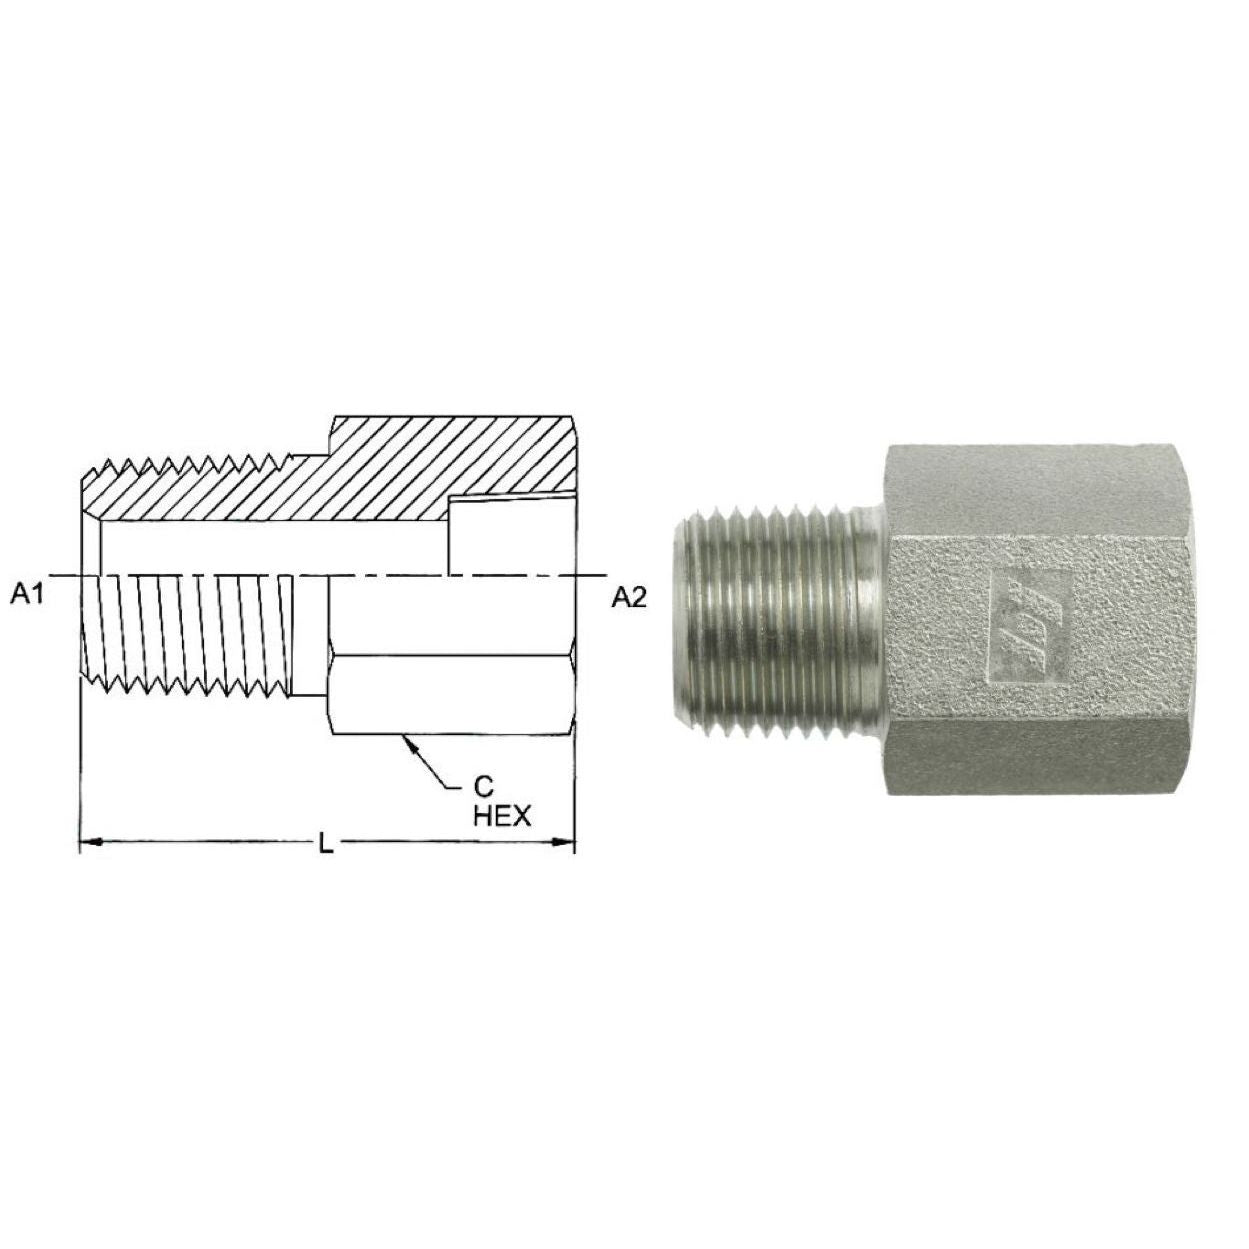 5405-06-06 : OneHydraulics Adapter, Straight Expander, 0.375 (3/8") Male NPT x 0.375 (3/8") Female, Steel, 6000psi